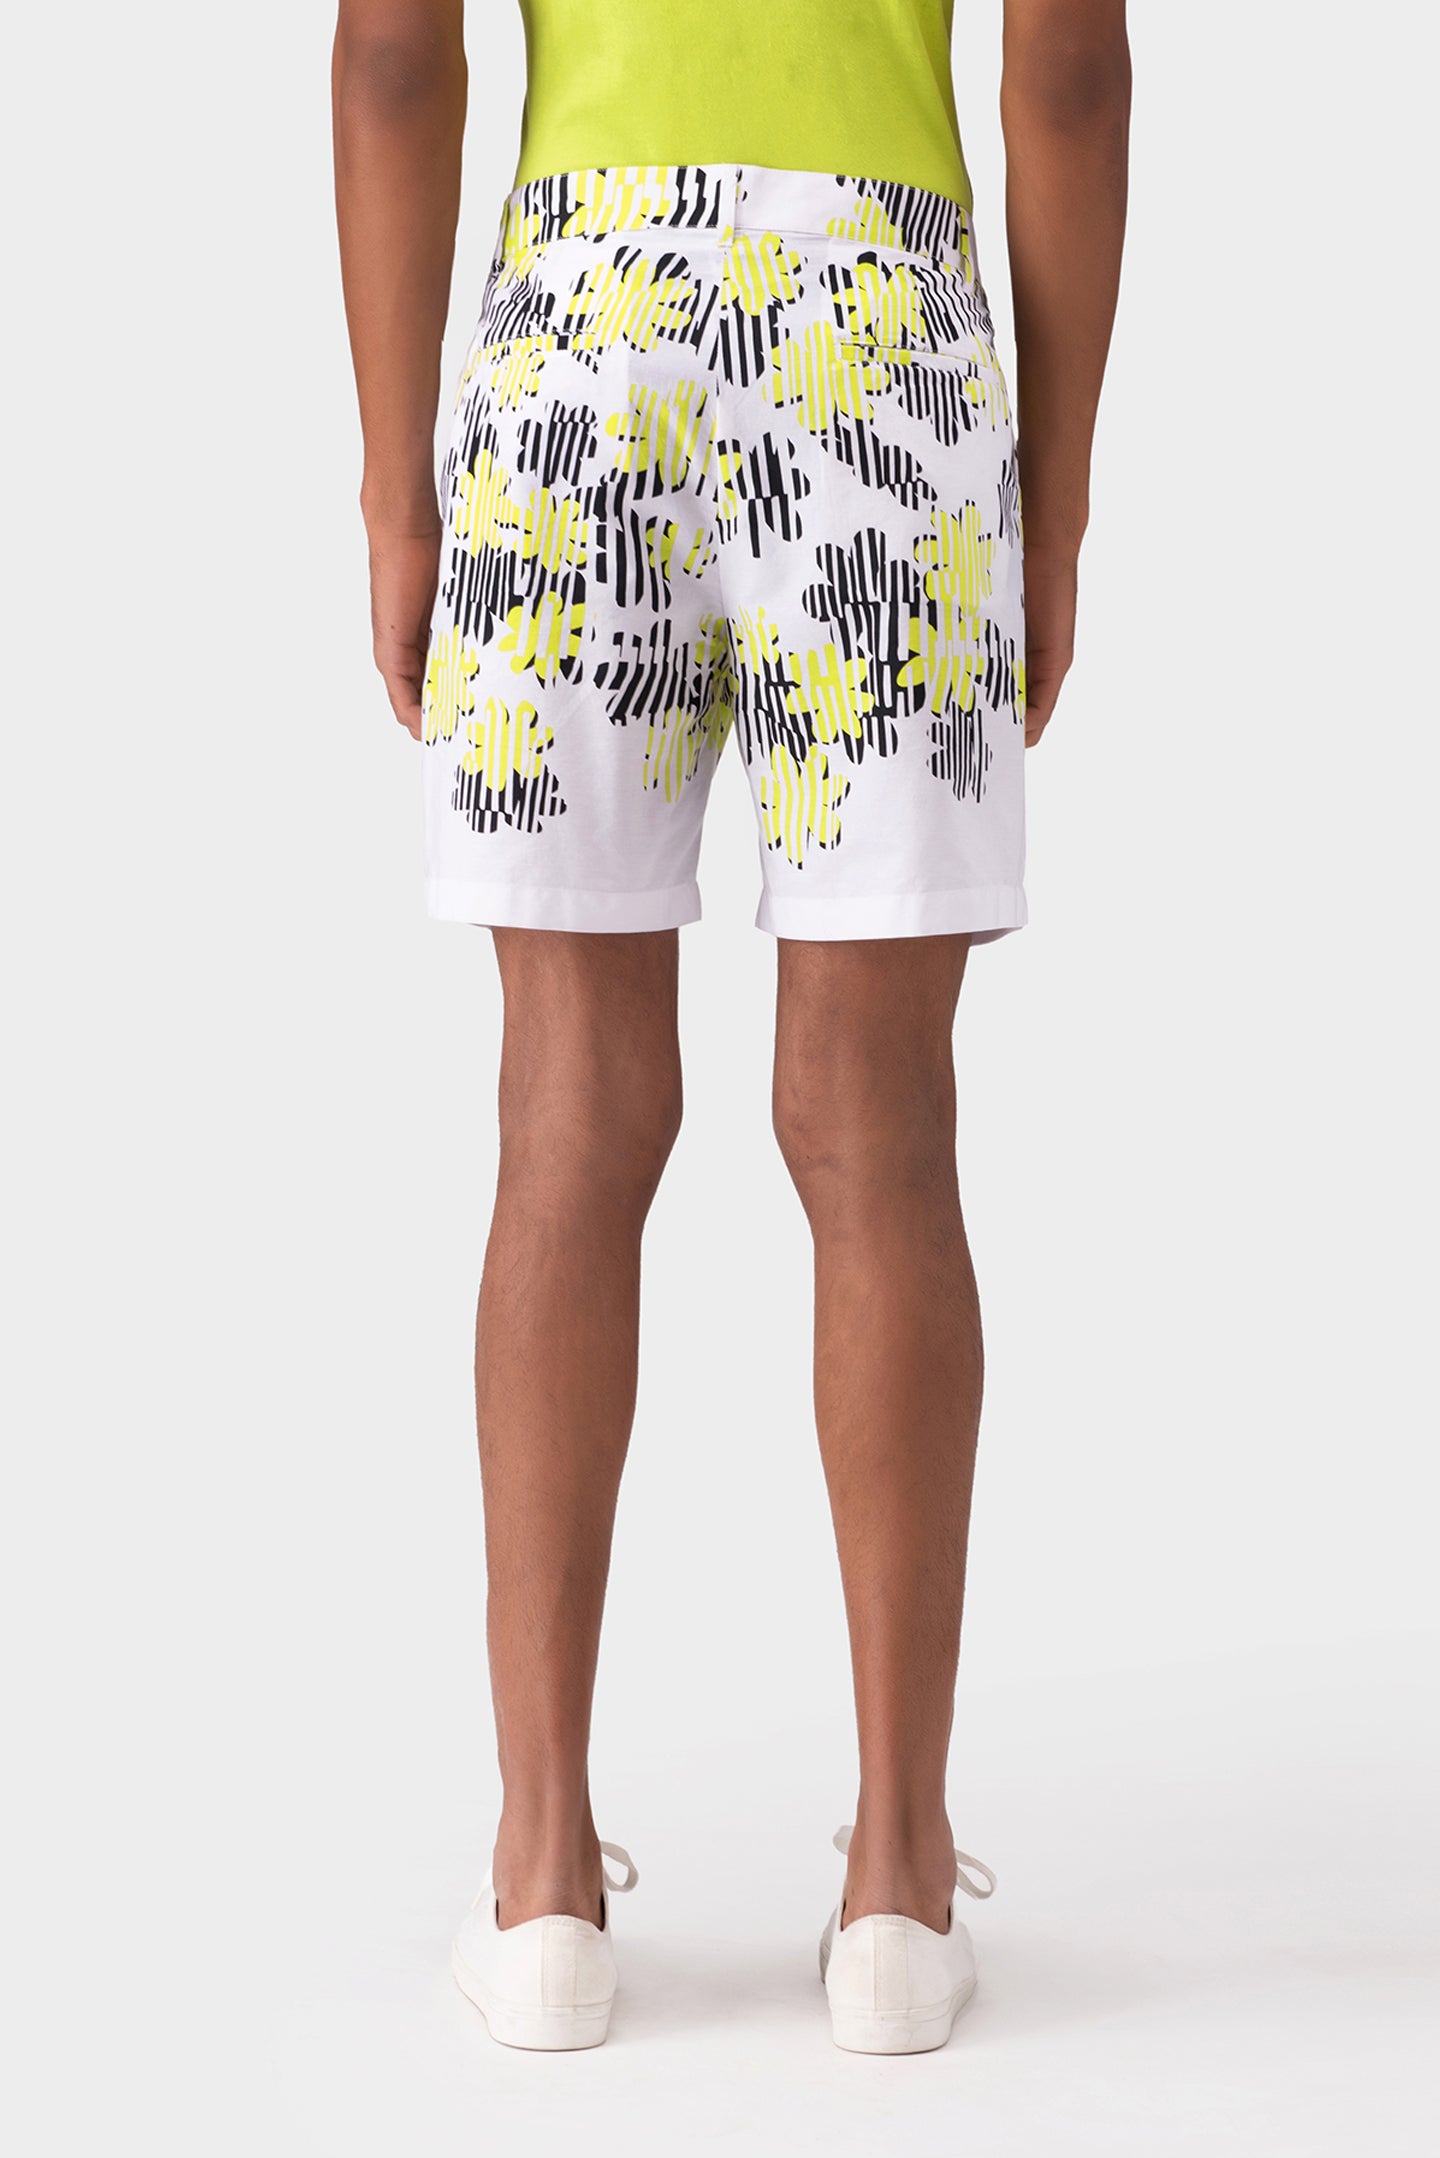 Floral Collage Mens Shorts